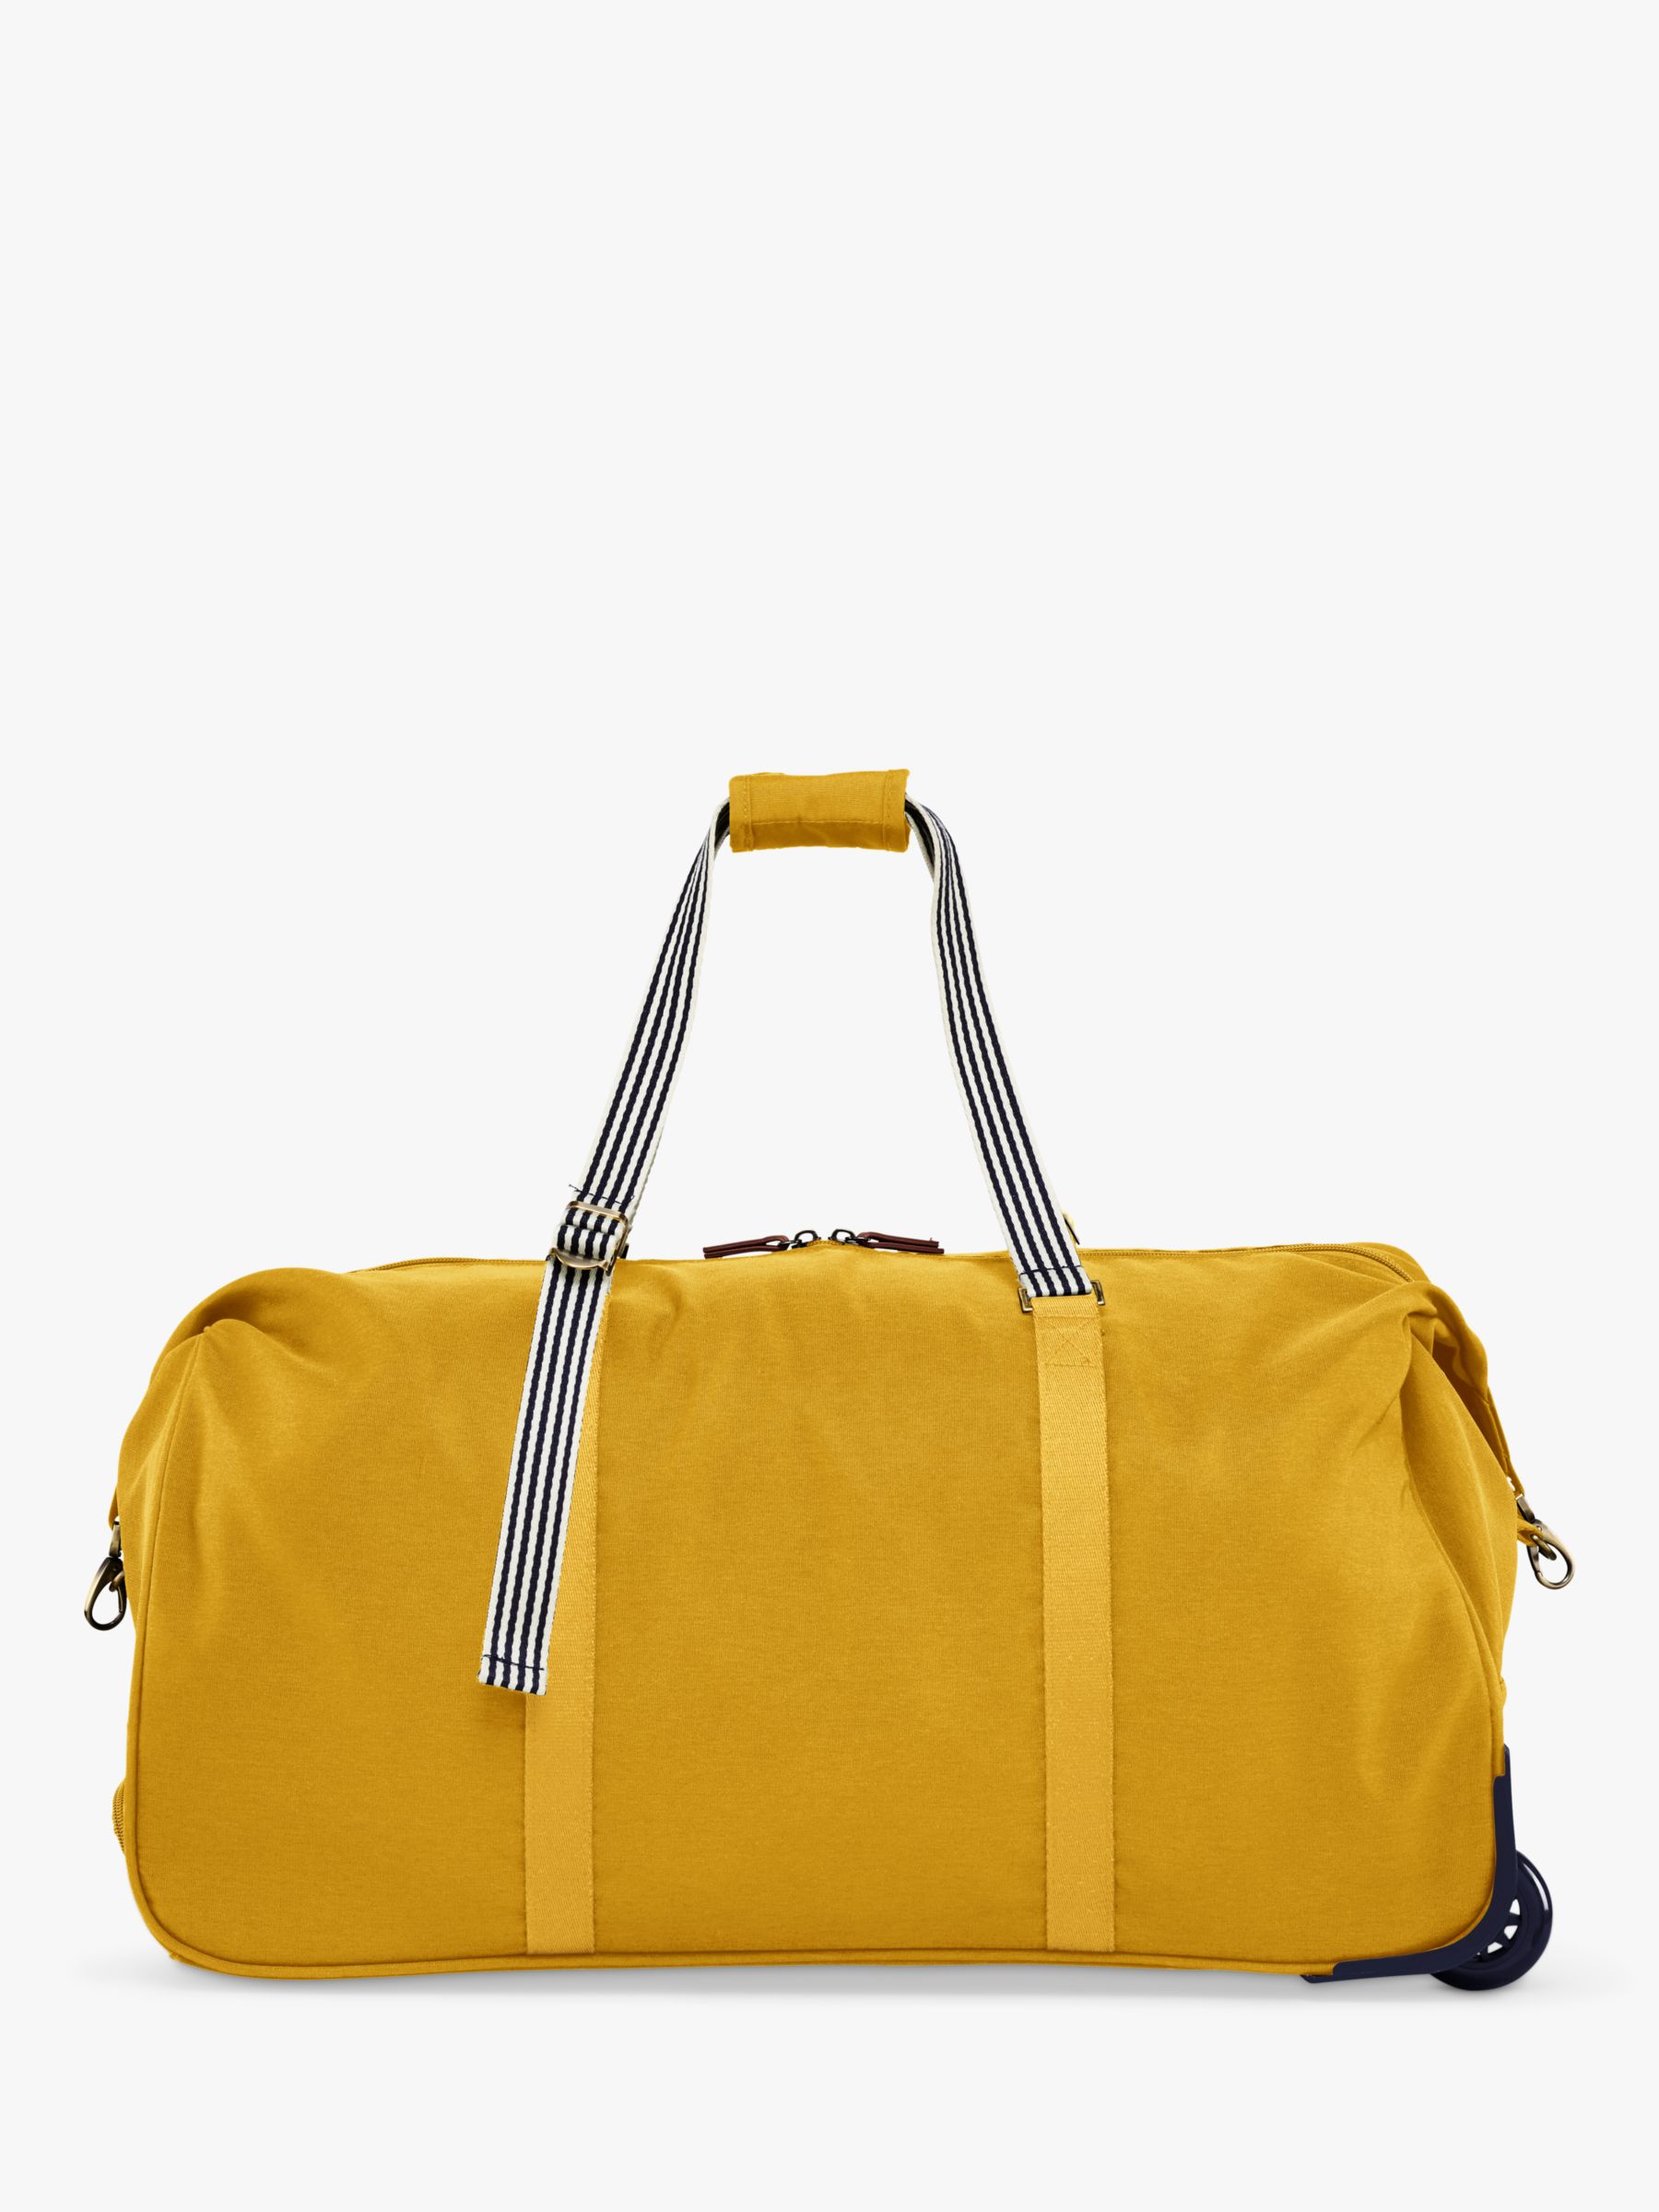 Joules Coast Collection 2-Wheel Duffle Bag, Gold at John Lewis & Partners